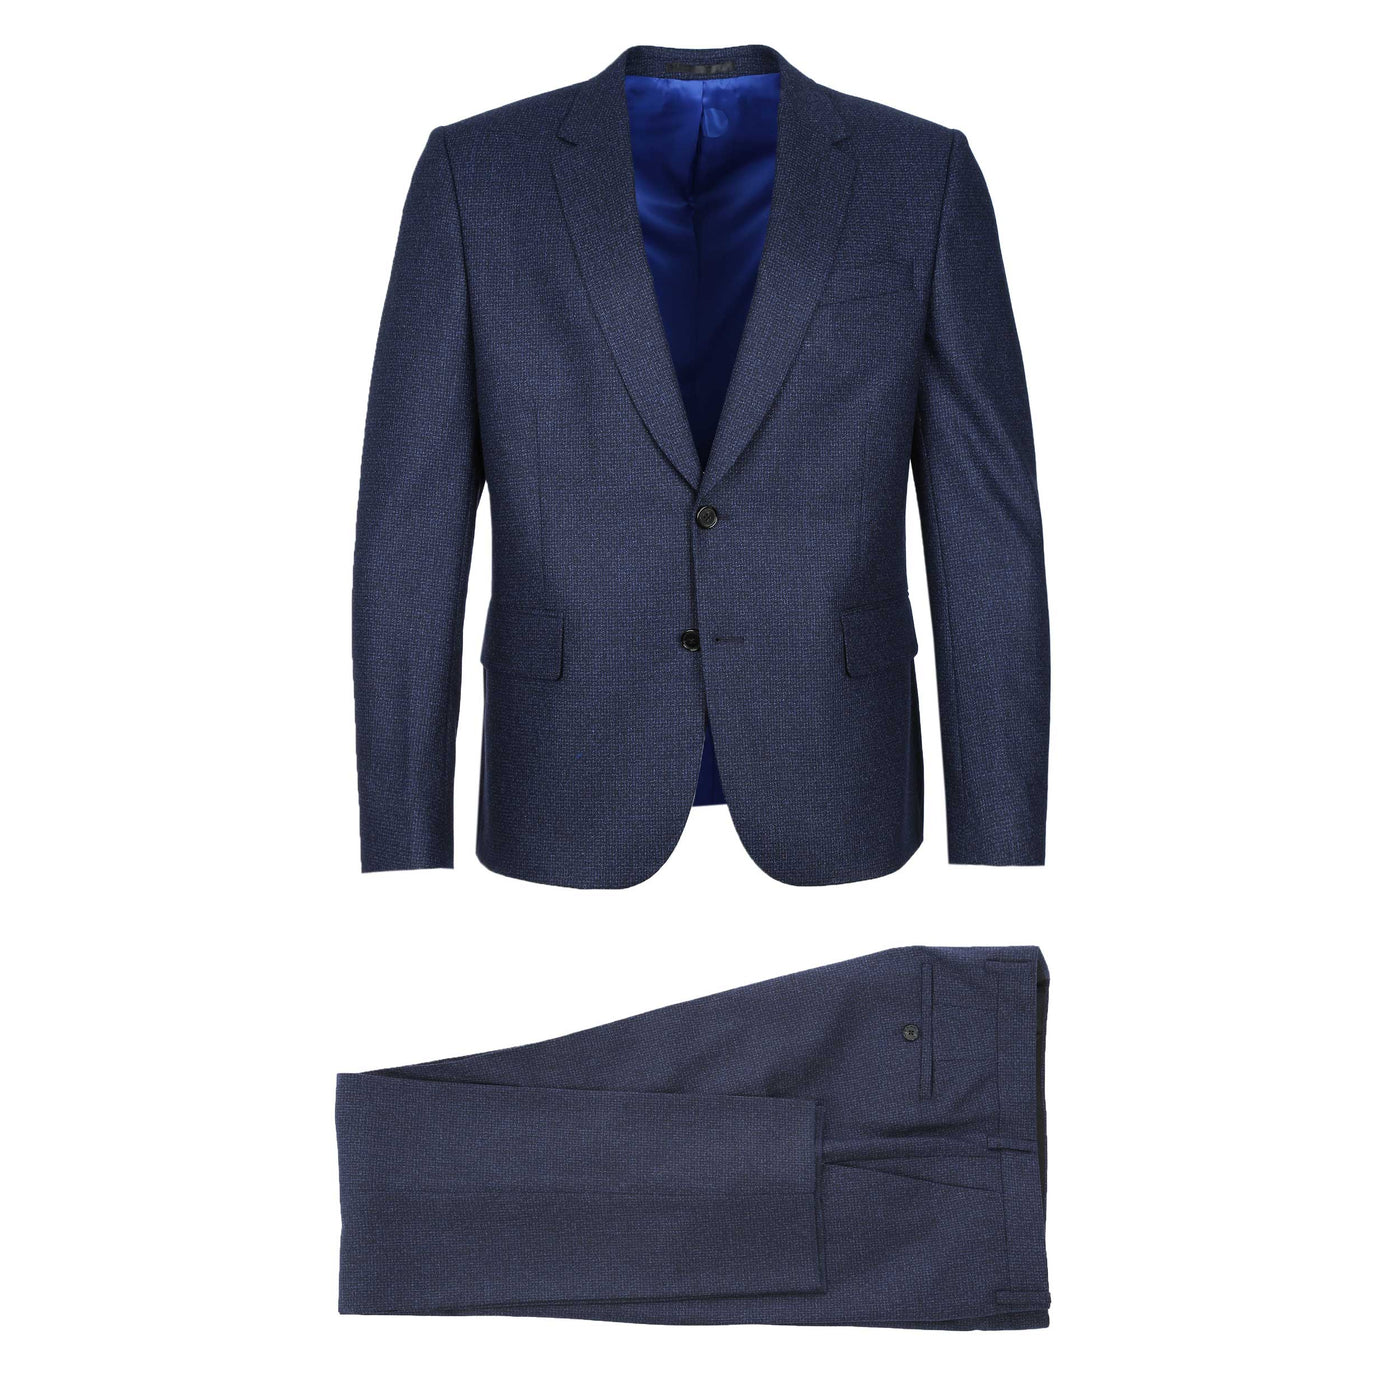 Paul Smith 2 Button Tailored Fit suit in Navy